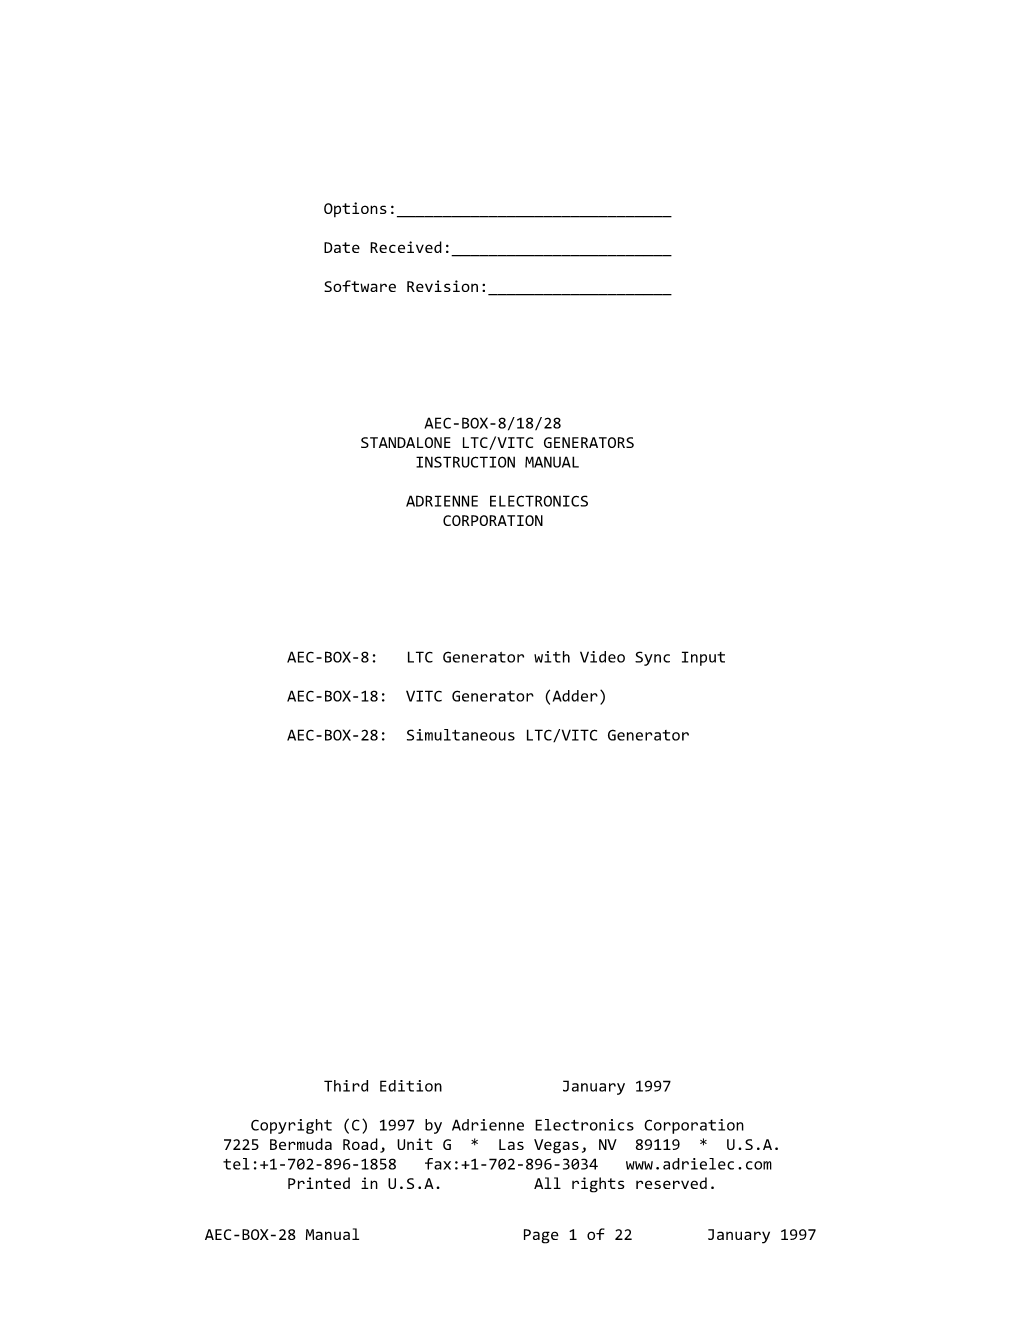 AEC-BOX-28 Manual Page 1 of 22 January 1997 *** FCC NOTICE ***